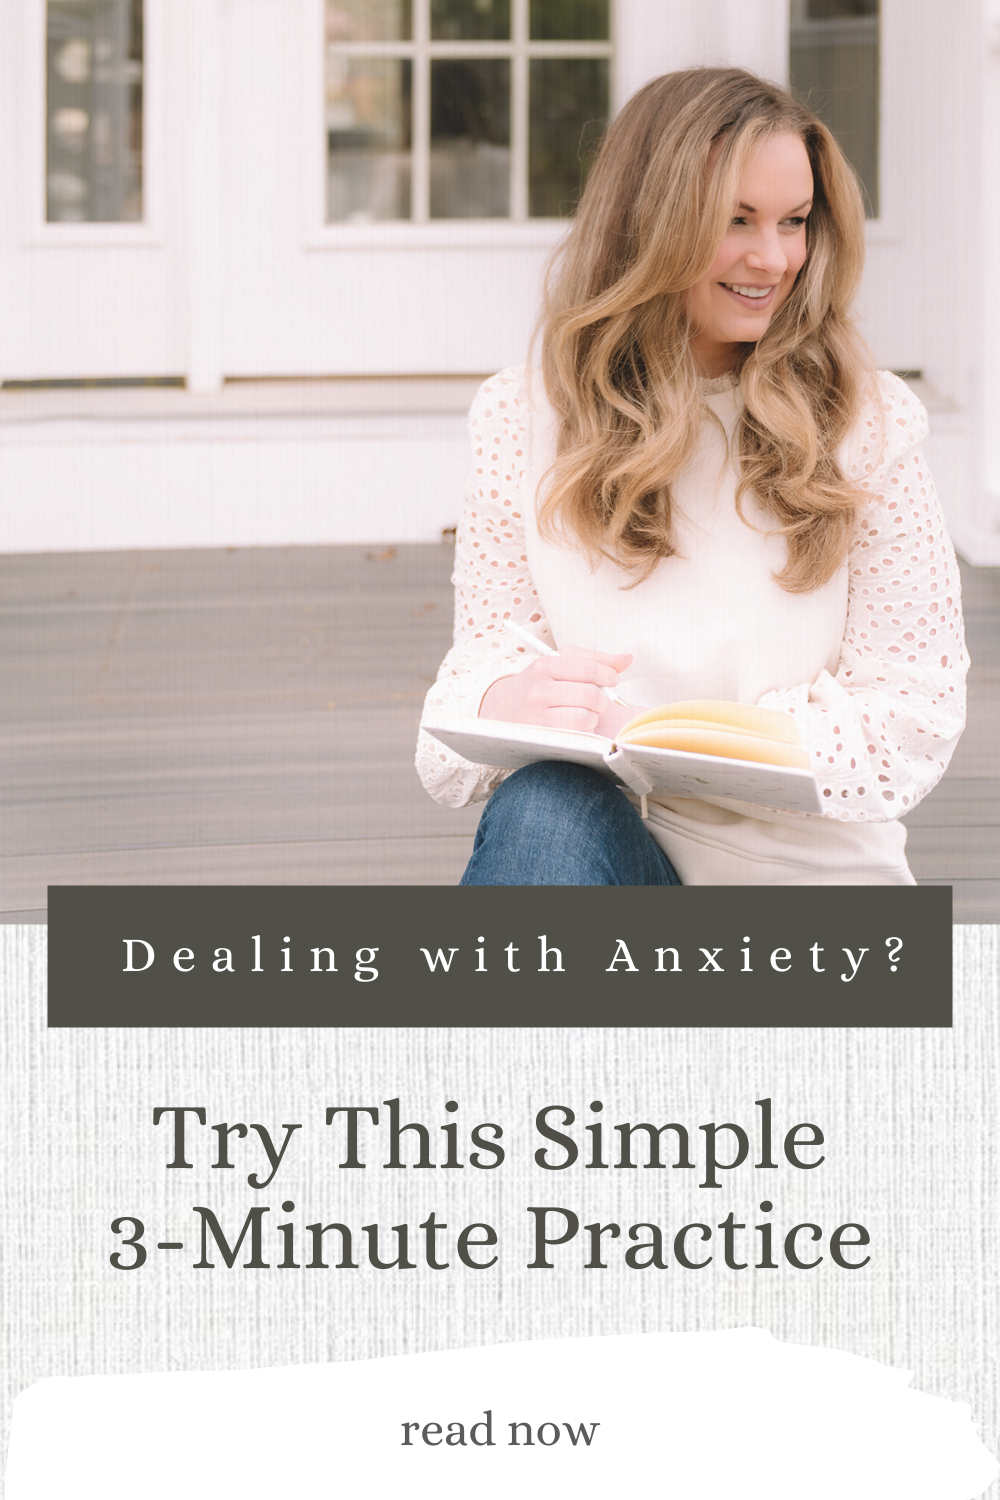 Try-This-Simple-3-Minute-Practice-for-Dealing-with-Anxiety- Pinterest